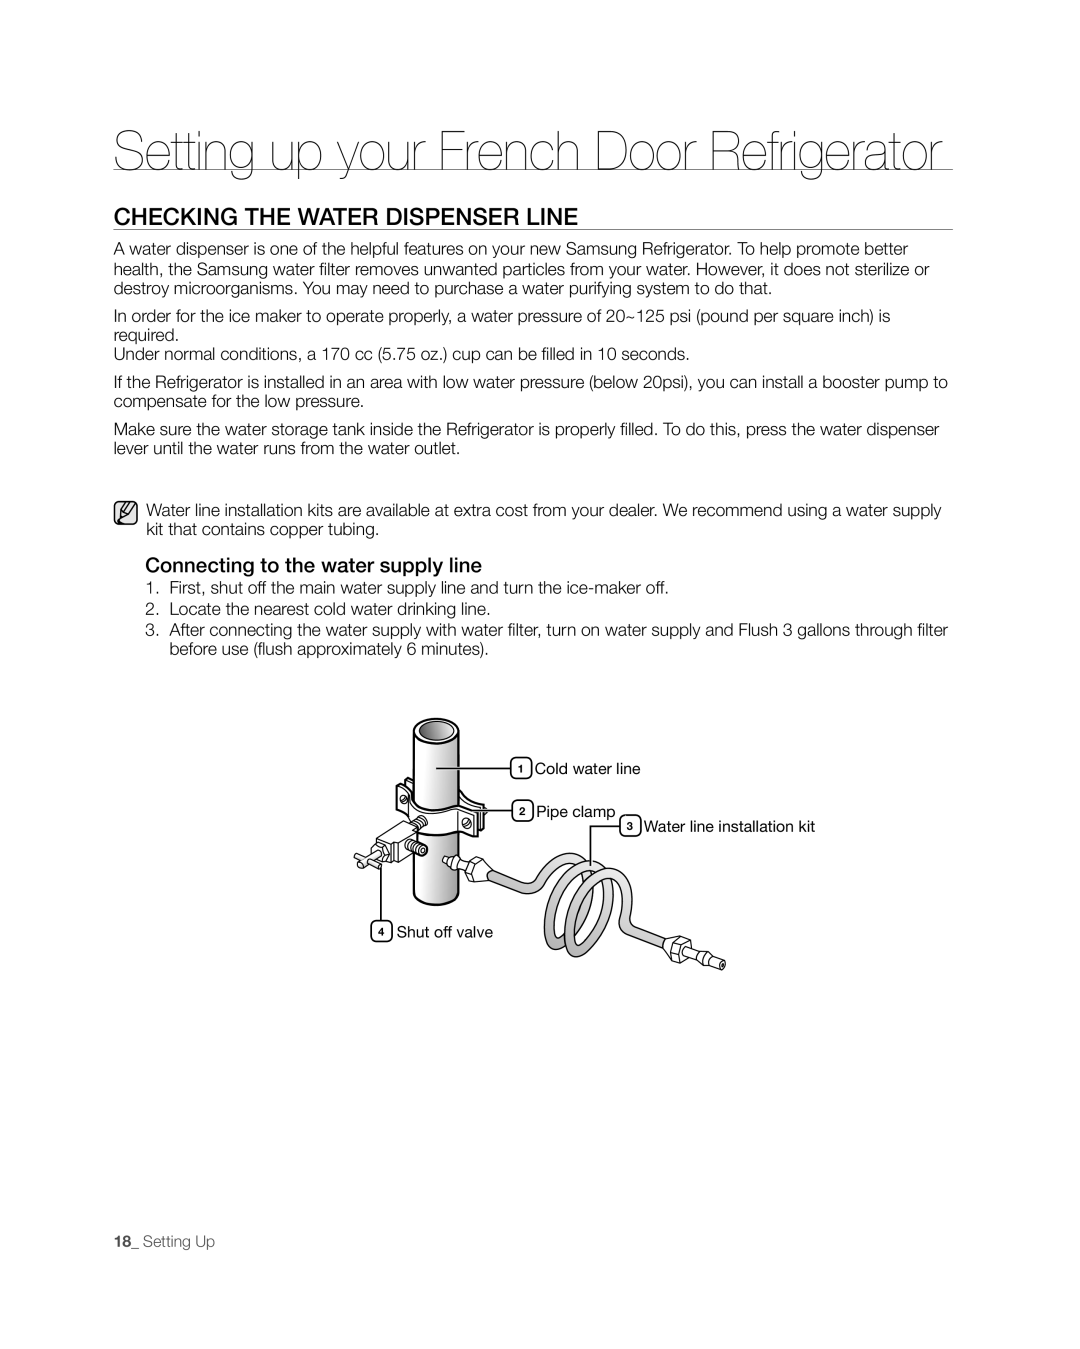 Samsung RFG297AAWP user manual CHECKinG tHE wAtER DisPEnsER LinE, Setting up your French Door Refrigerator 